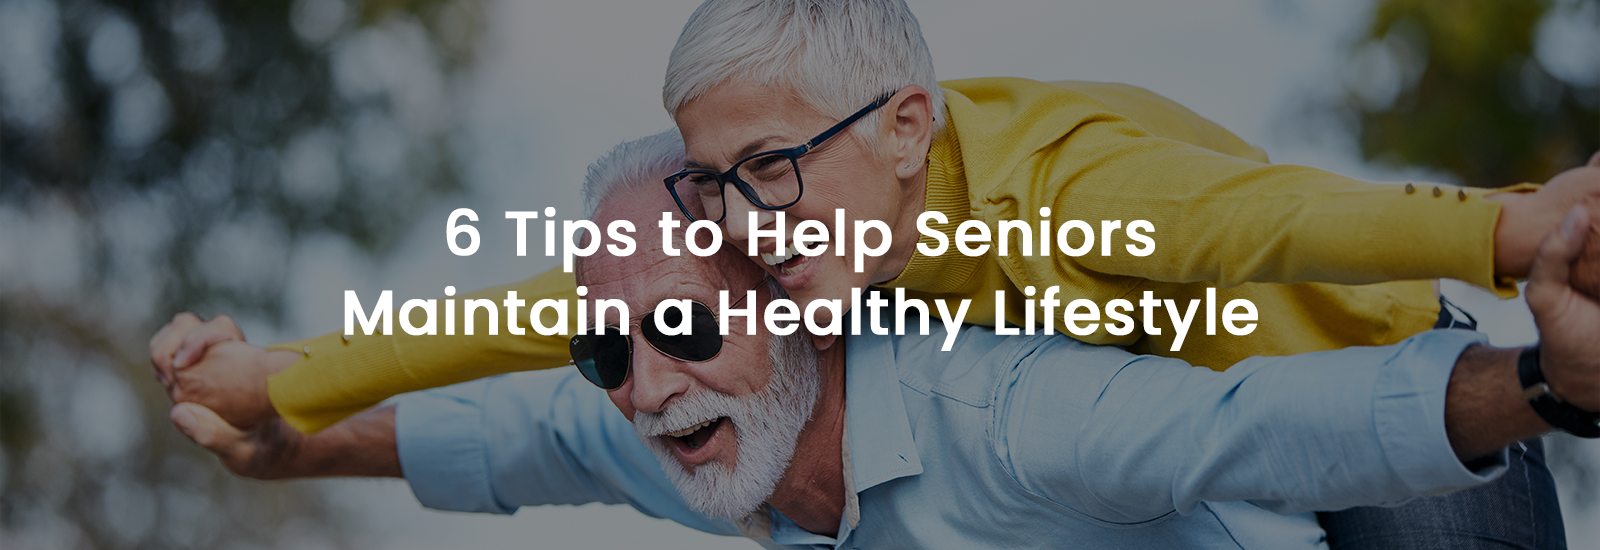 6 Tips to Help Seniors Maintain a Healthy Lifestyle | Banner Image